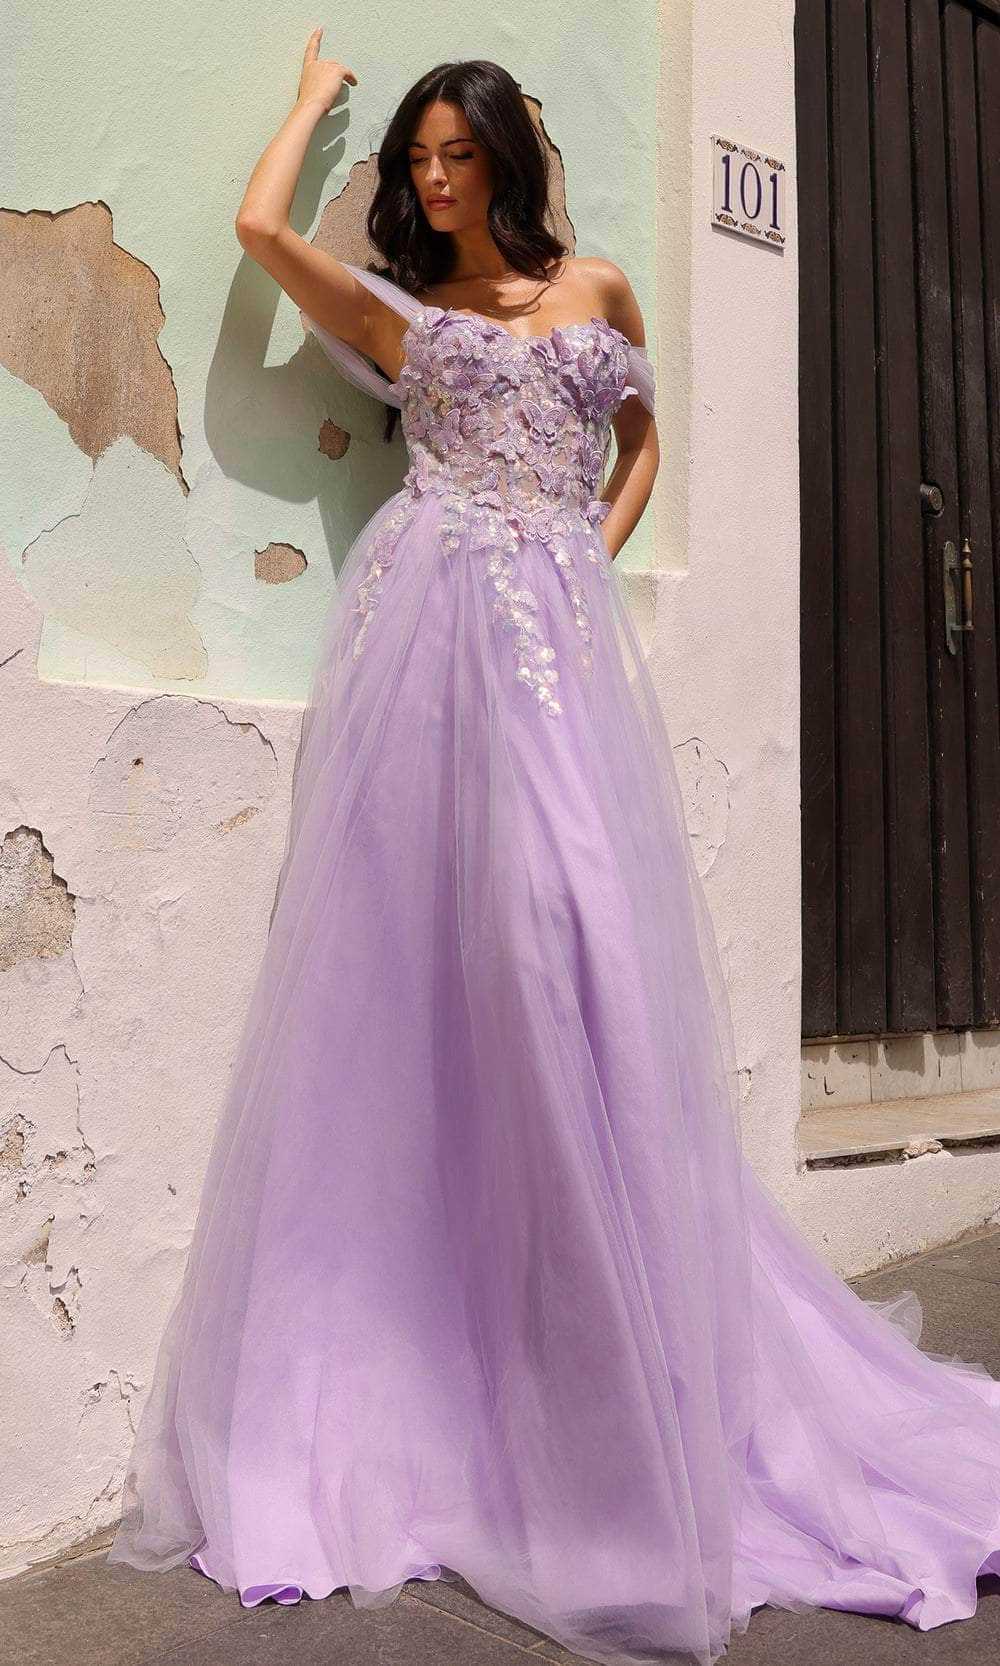 Nox Anabel, Nox Anabel J1324 - 3D Butterfly Embellished Corset Bodice Prom Gown